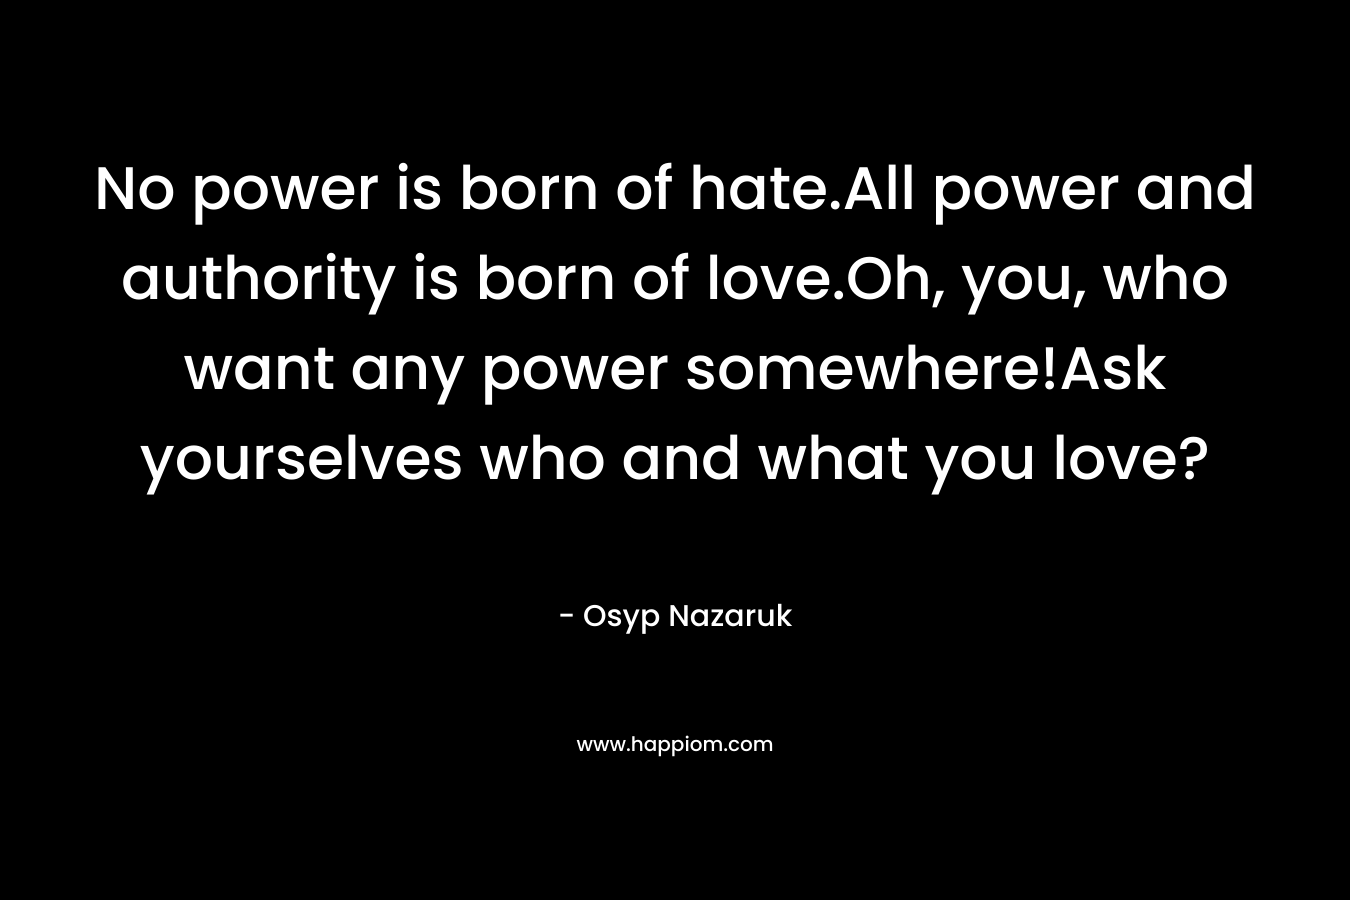 No power is born of hate.All power and authority is born of love.Oh, you, who want any power somewhere!Ask yourselves who and what you love?